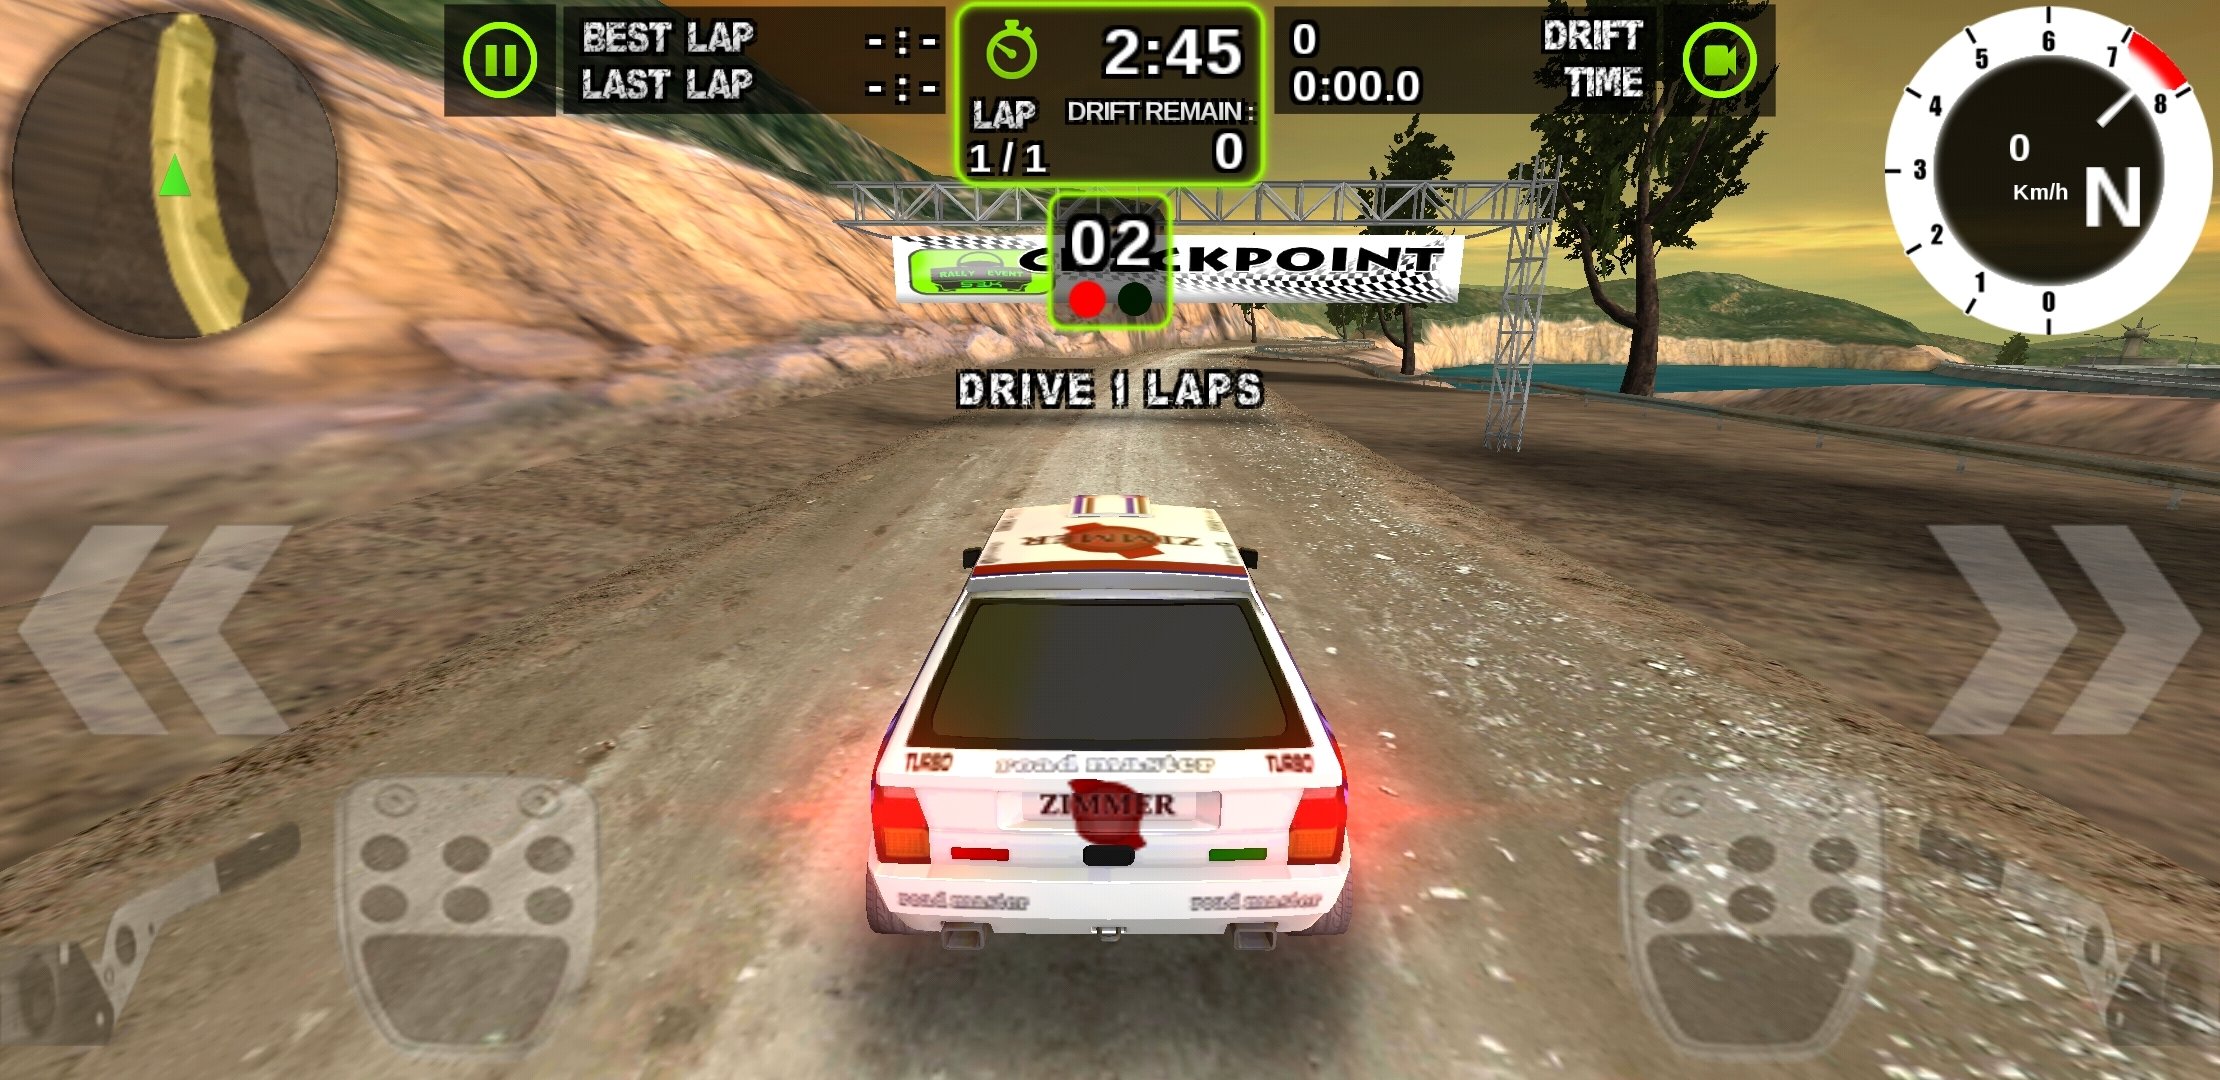 dirt rally trainer 1.2